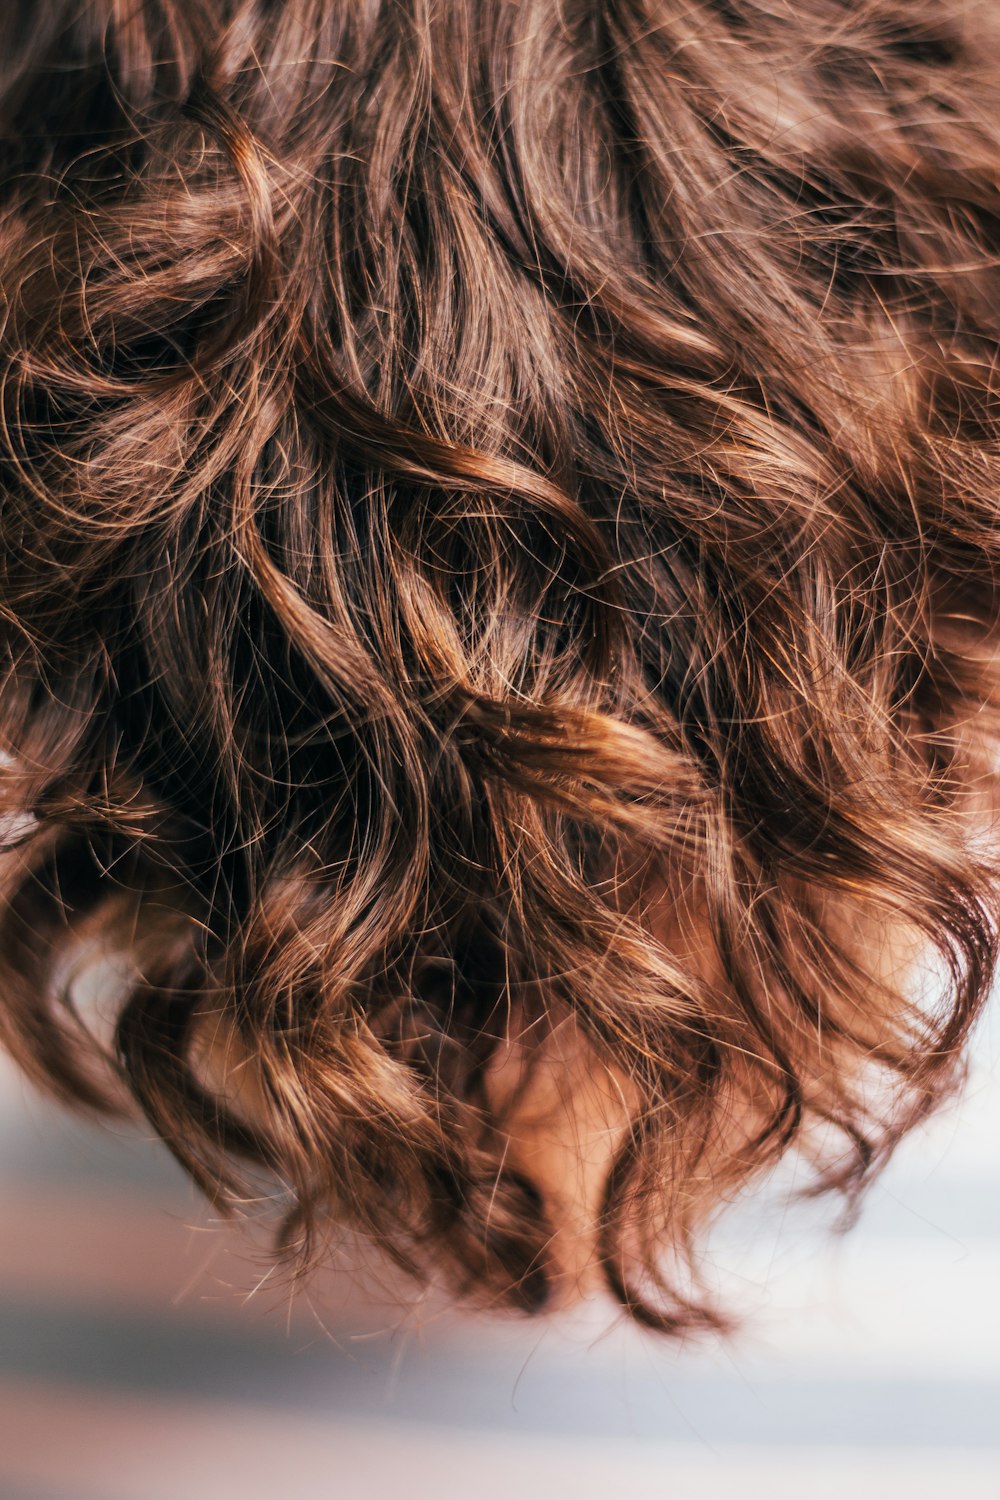 Frizzy Hair Pictures | Download Free Images on Unsplash